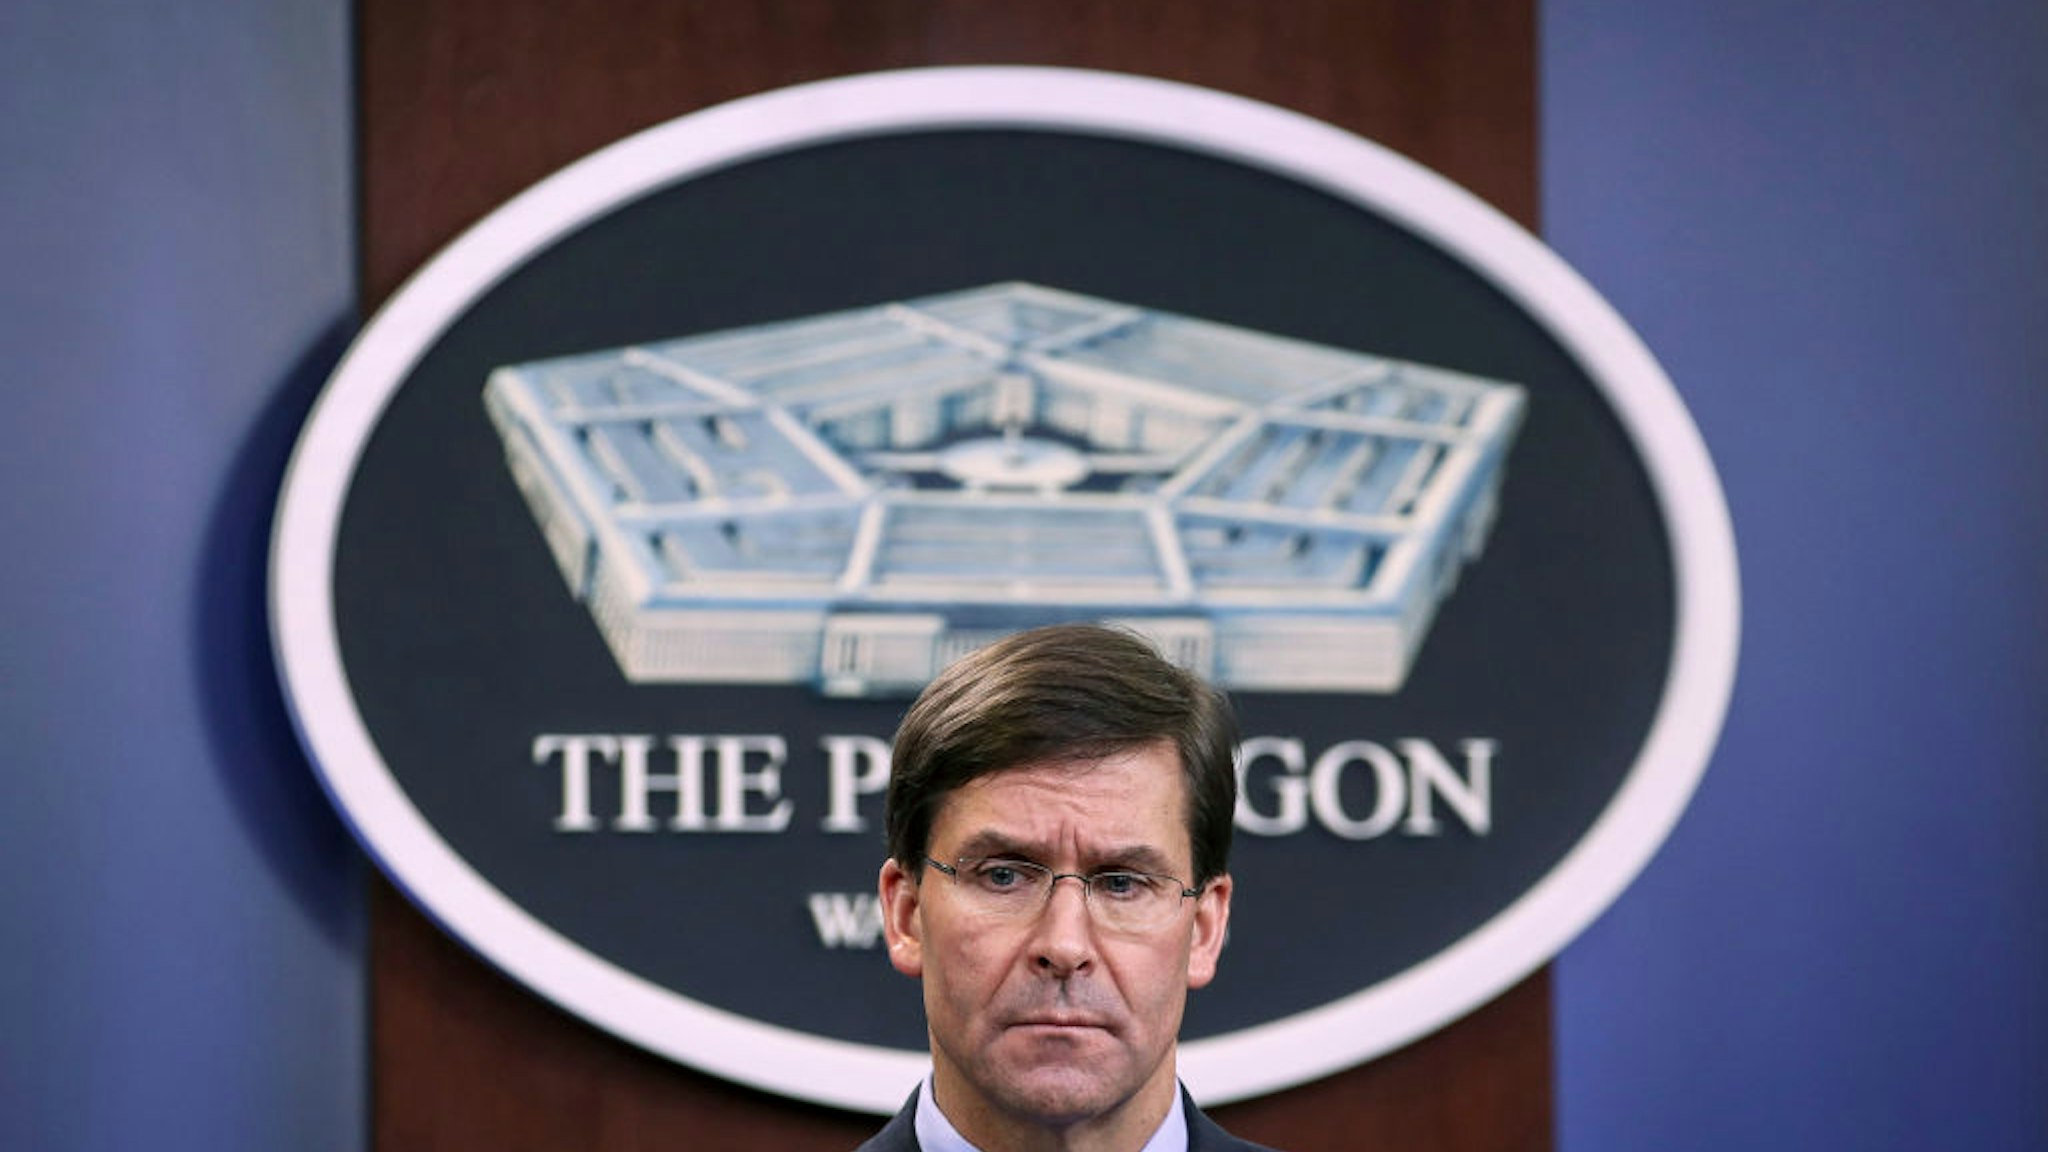 ARLINGTON, VA DECEMBER 20: Secretary of Defense Mark Esper holds an end of year press conference at the Pentagon on December 20, 2019 in Arlington, Virginia. Esper and Milley fielded questions on a wide range of topics, including the situation in North Korea and a recent Washington Post referred to as the "Afghanistan Papers."